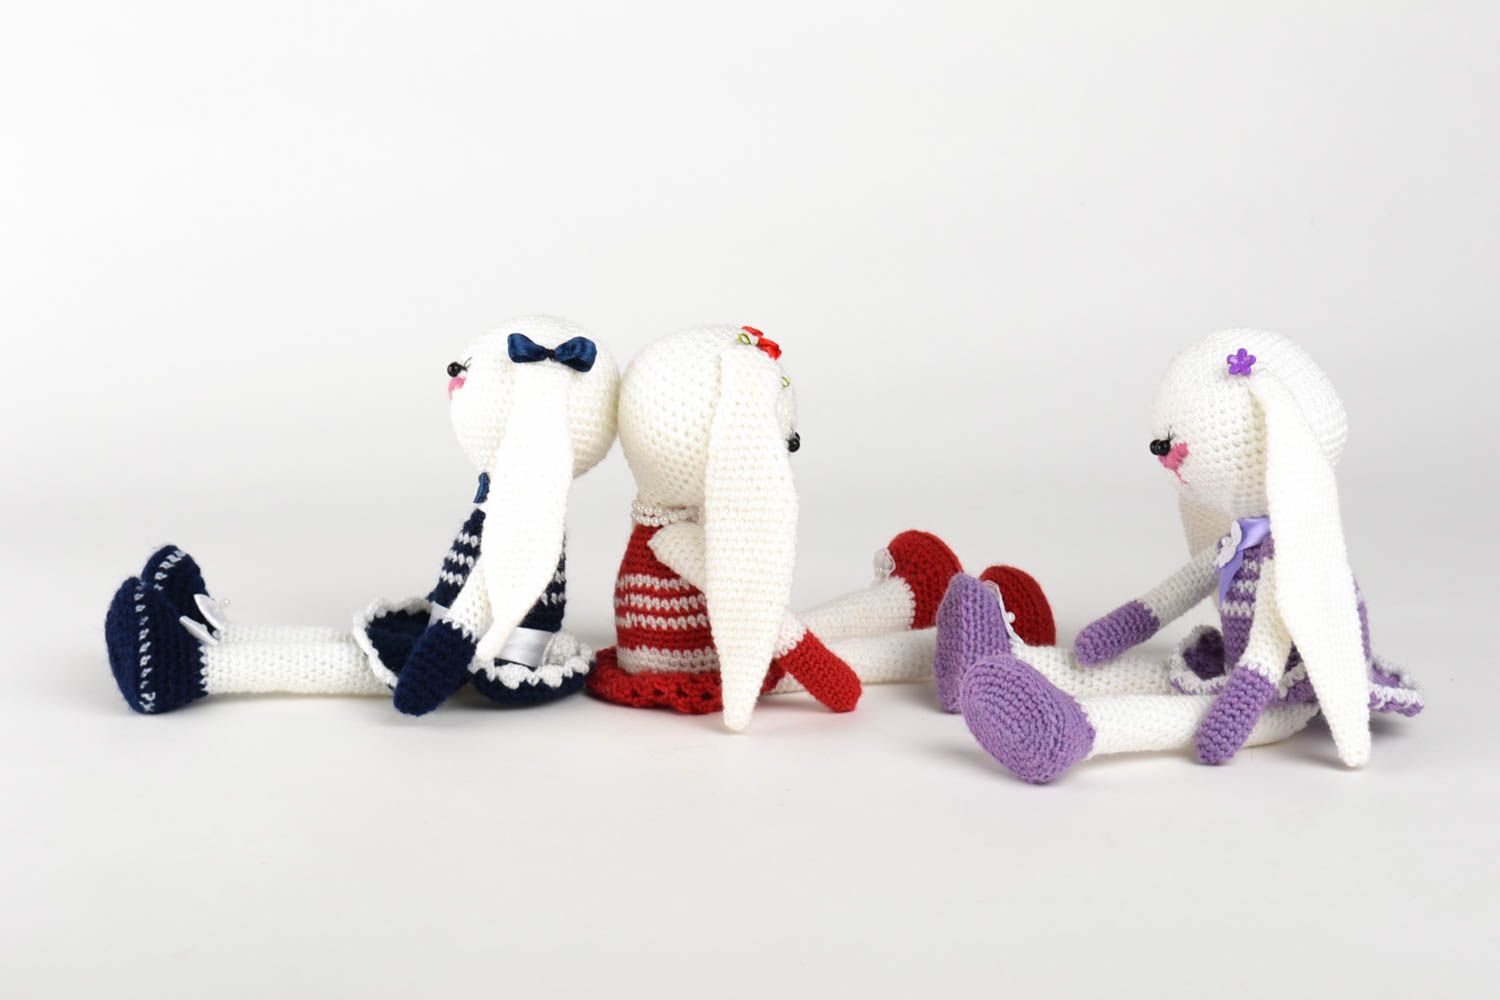 Set of three hand knitted stuffed plush rabbits in white red purple color 11,83,9 inches photo 2